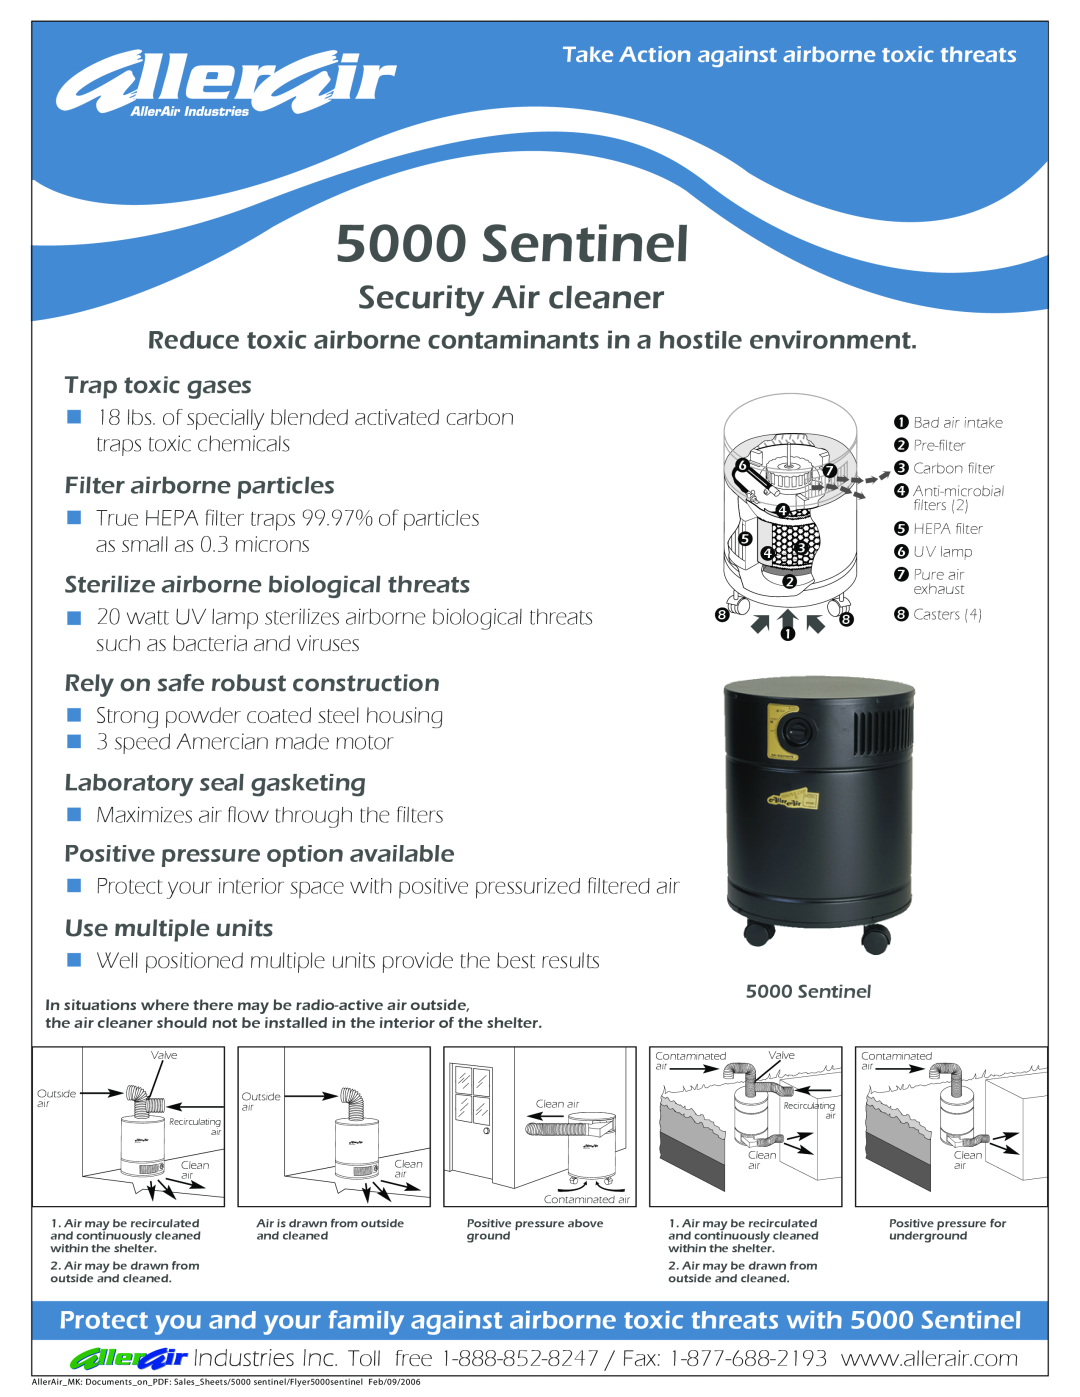 AllerAir 5000 Sentinel manual Trap toxic gases, Filter airborne particles, Sterilize airborne biological threats 